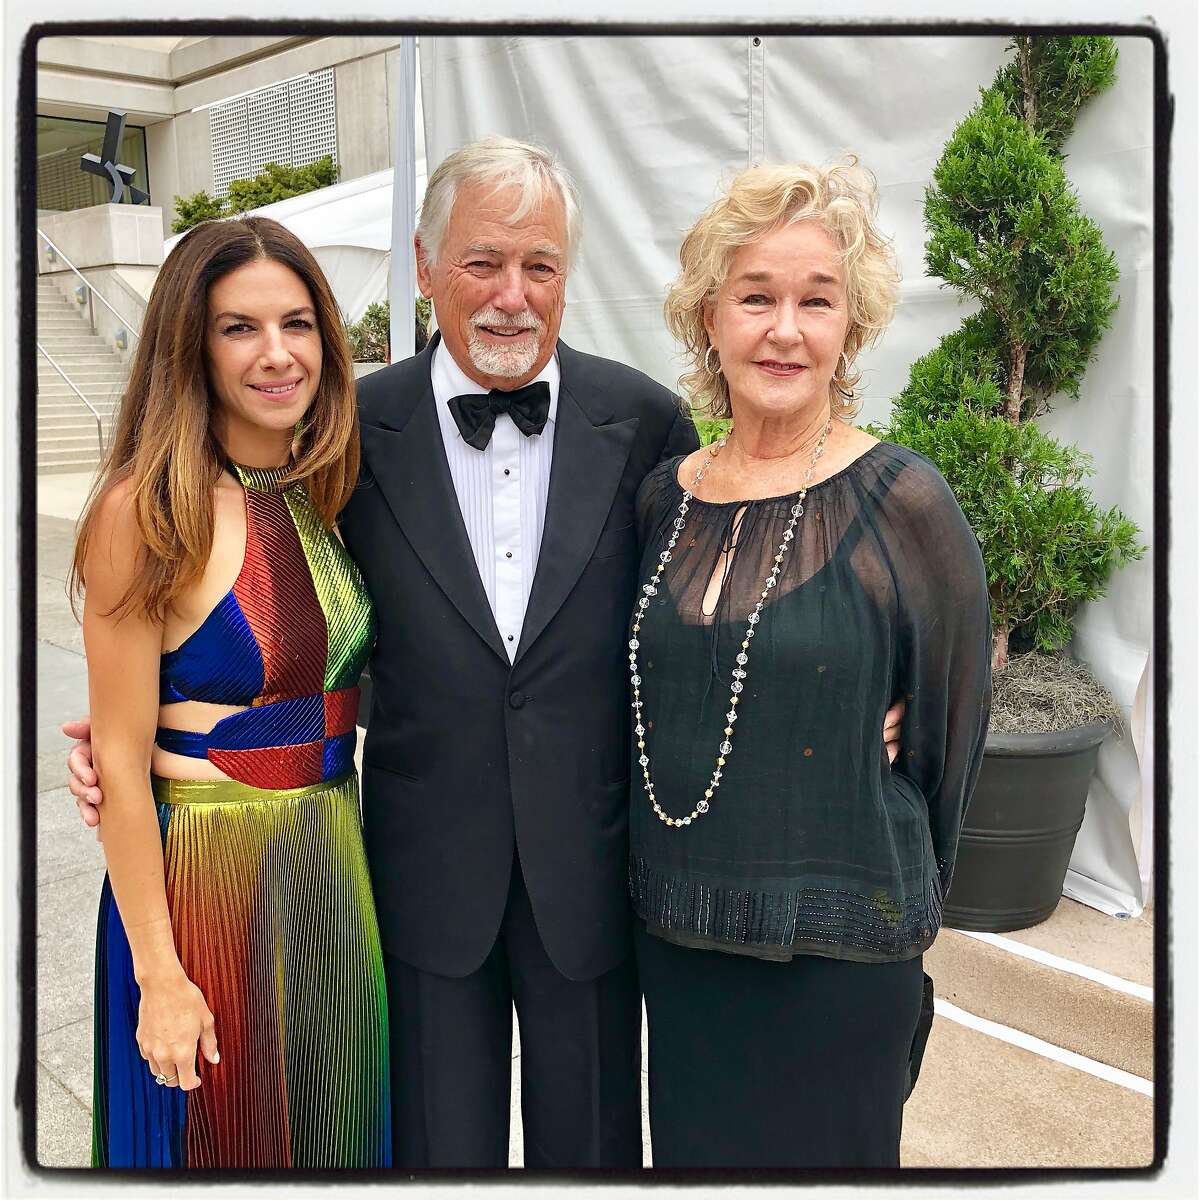 Sabrina Buell (left) with her dad Mark Buell and his wife, Susie Tompkins Buell at the SF Symphony Gala. Sept. 5, 2018.